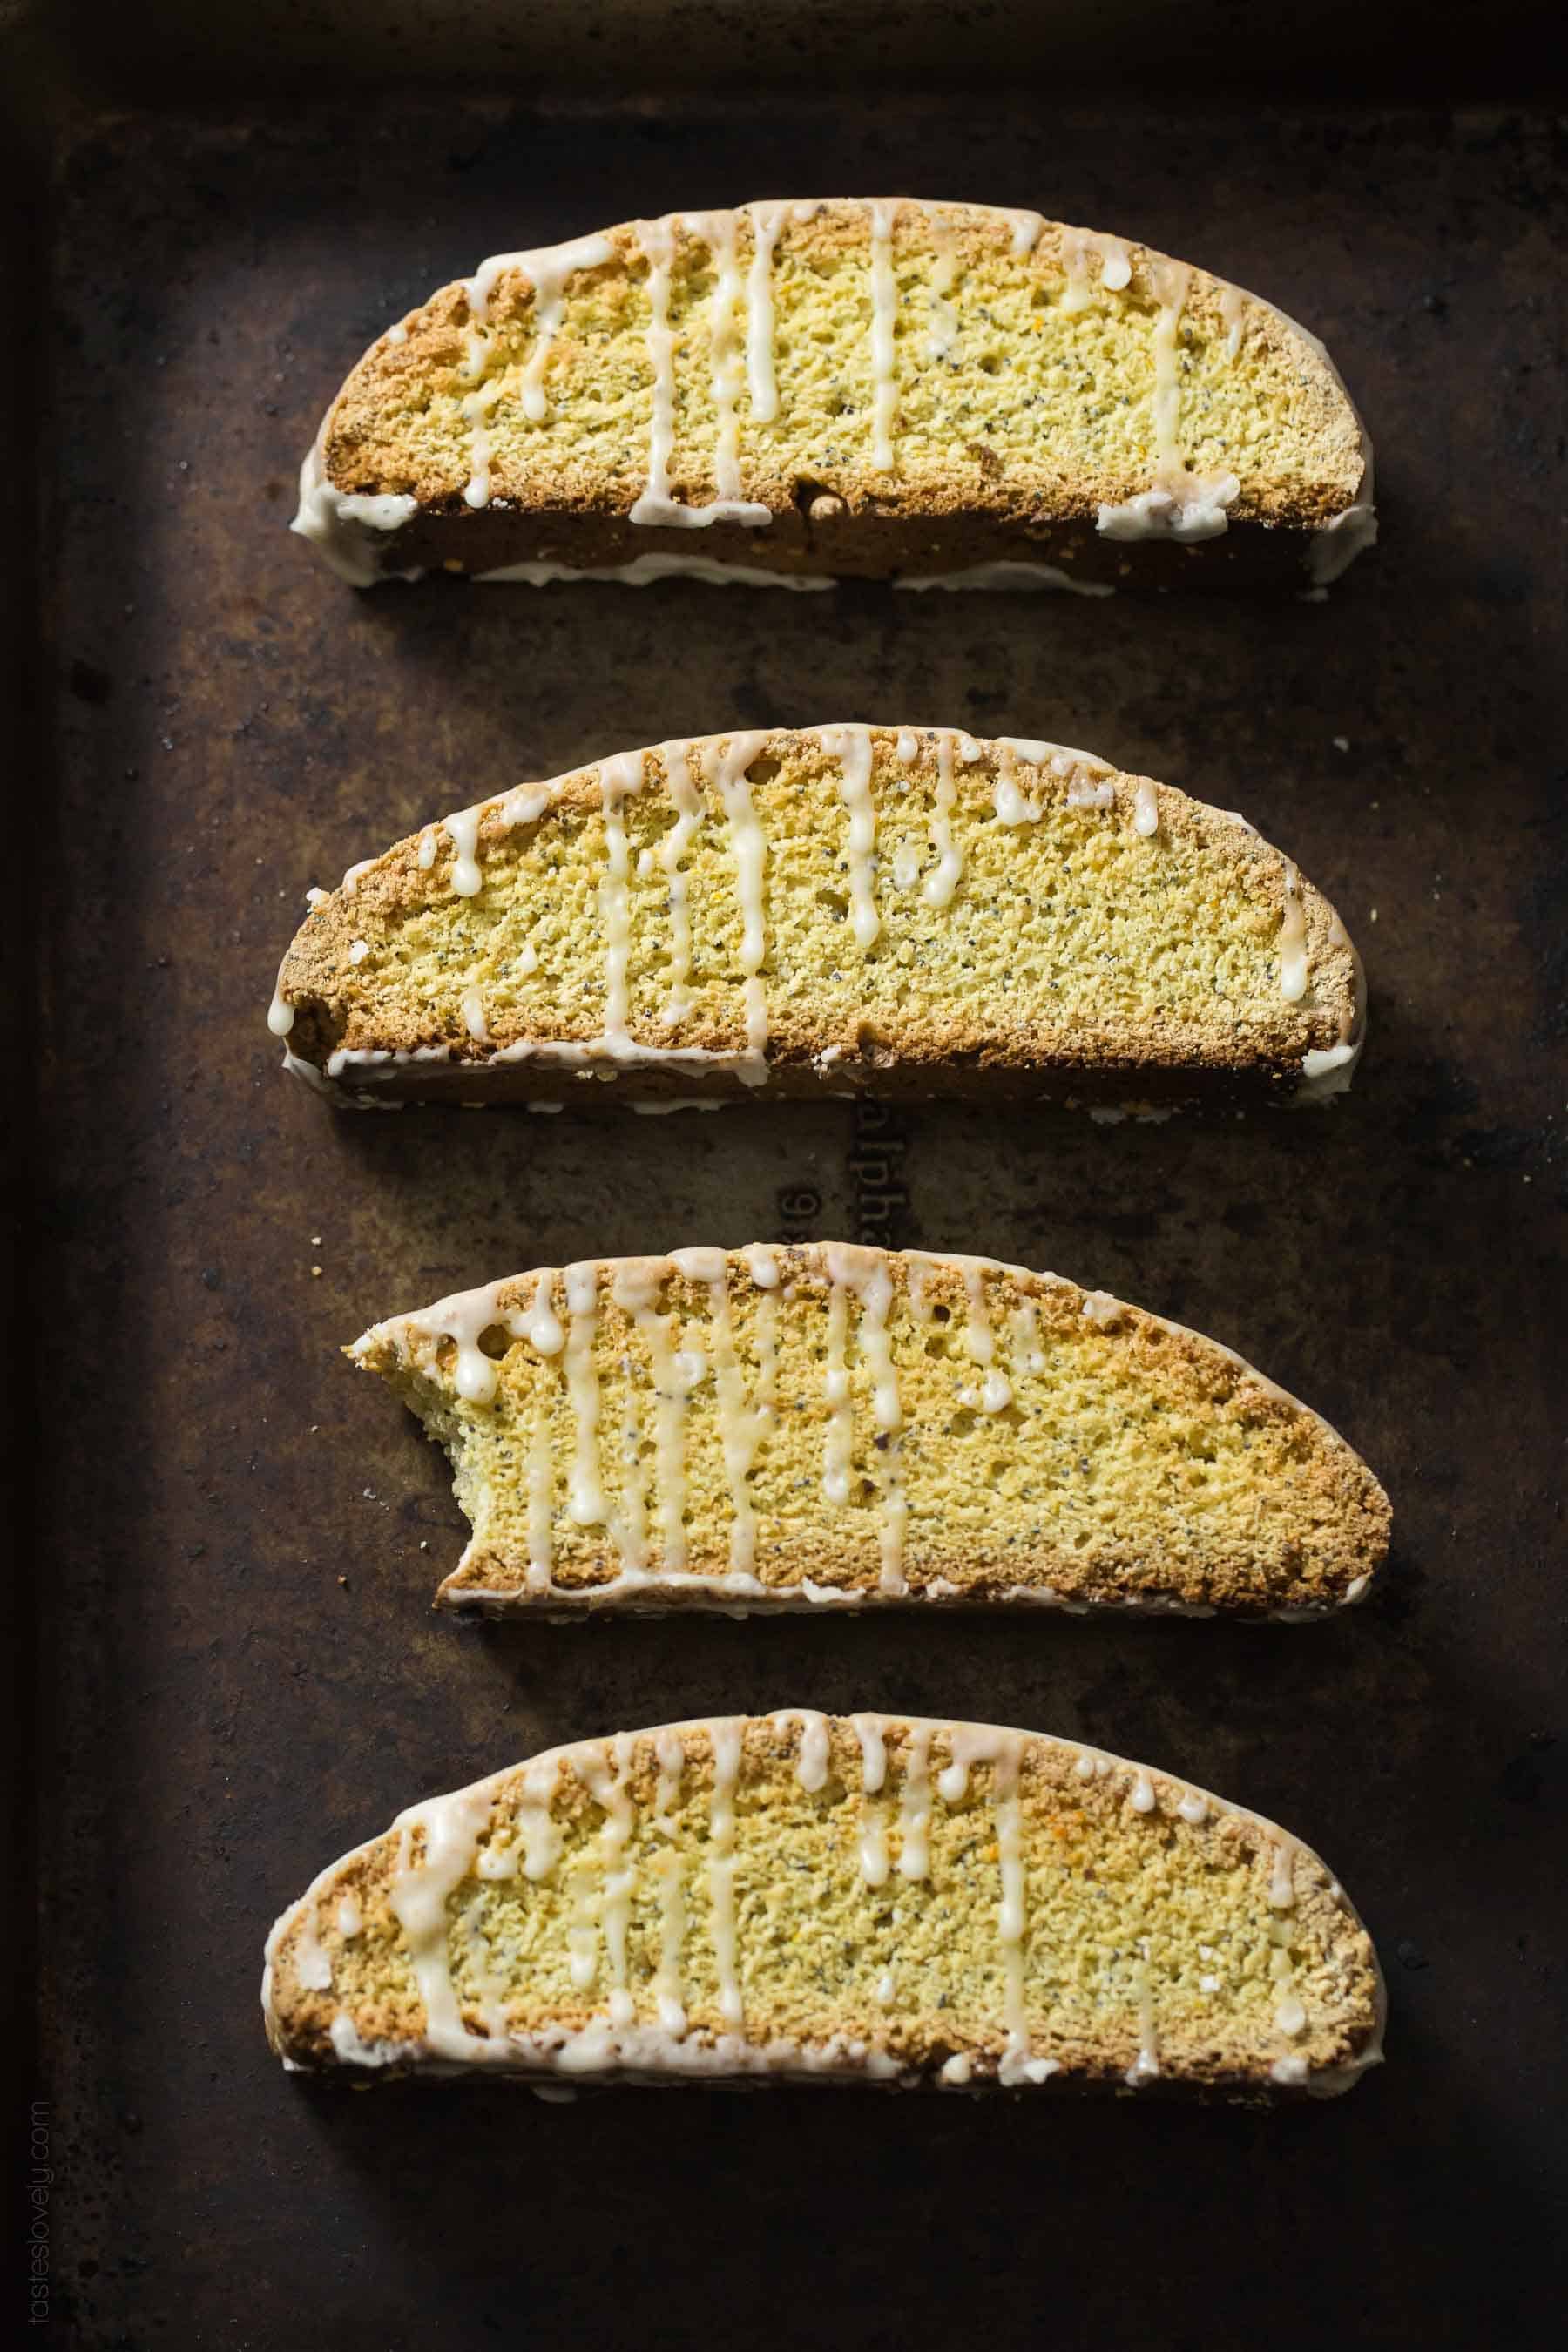 Orange Poppy Seed Biscotti - made with no butter so they're dairy free!